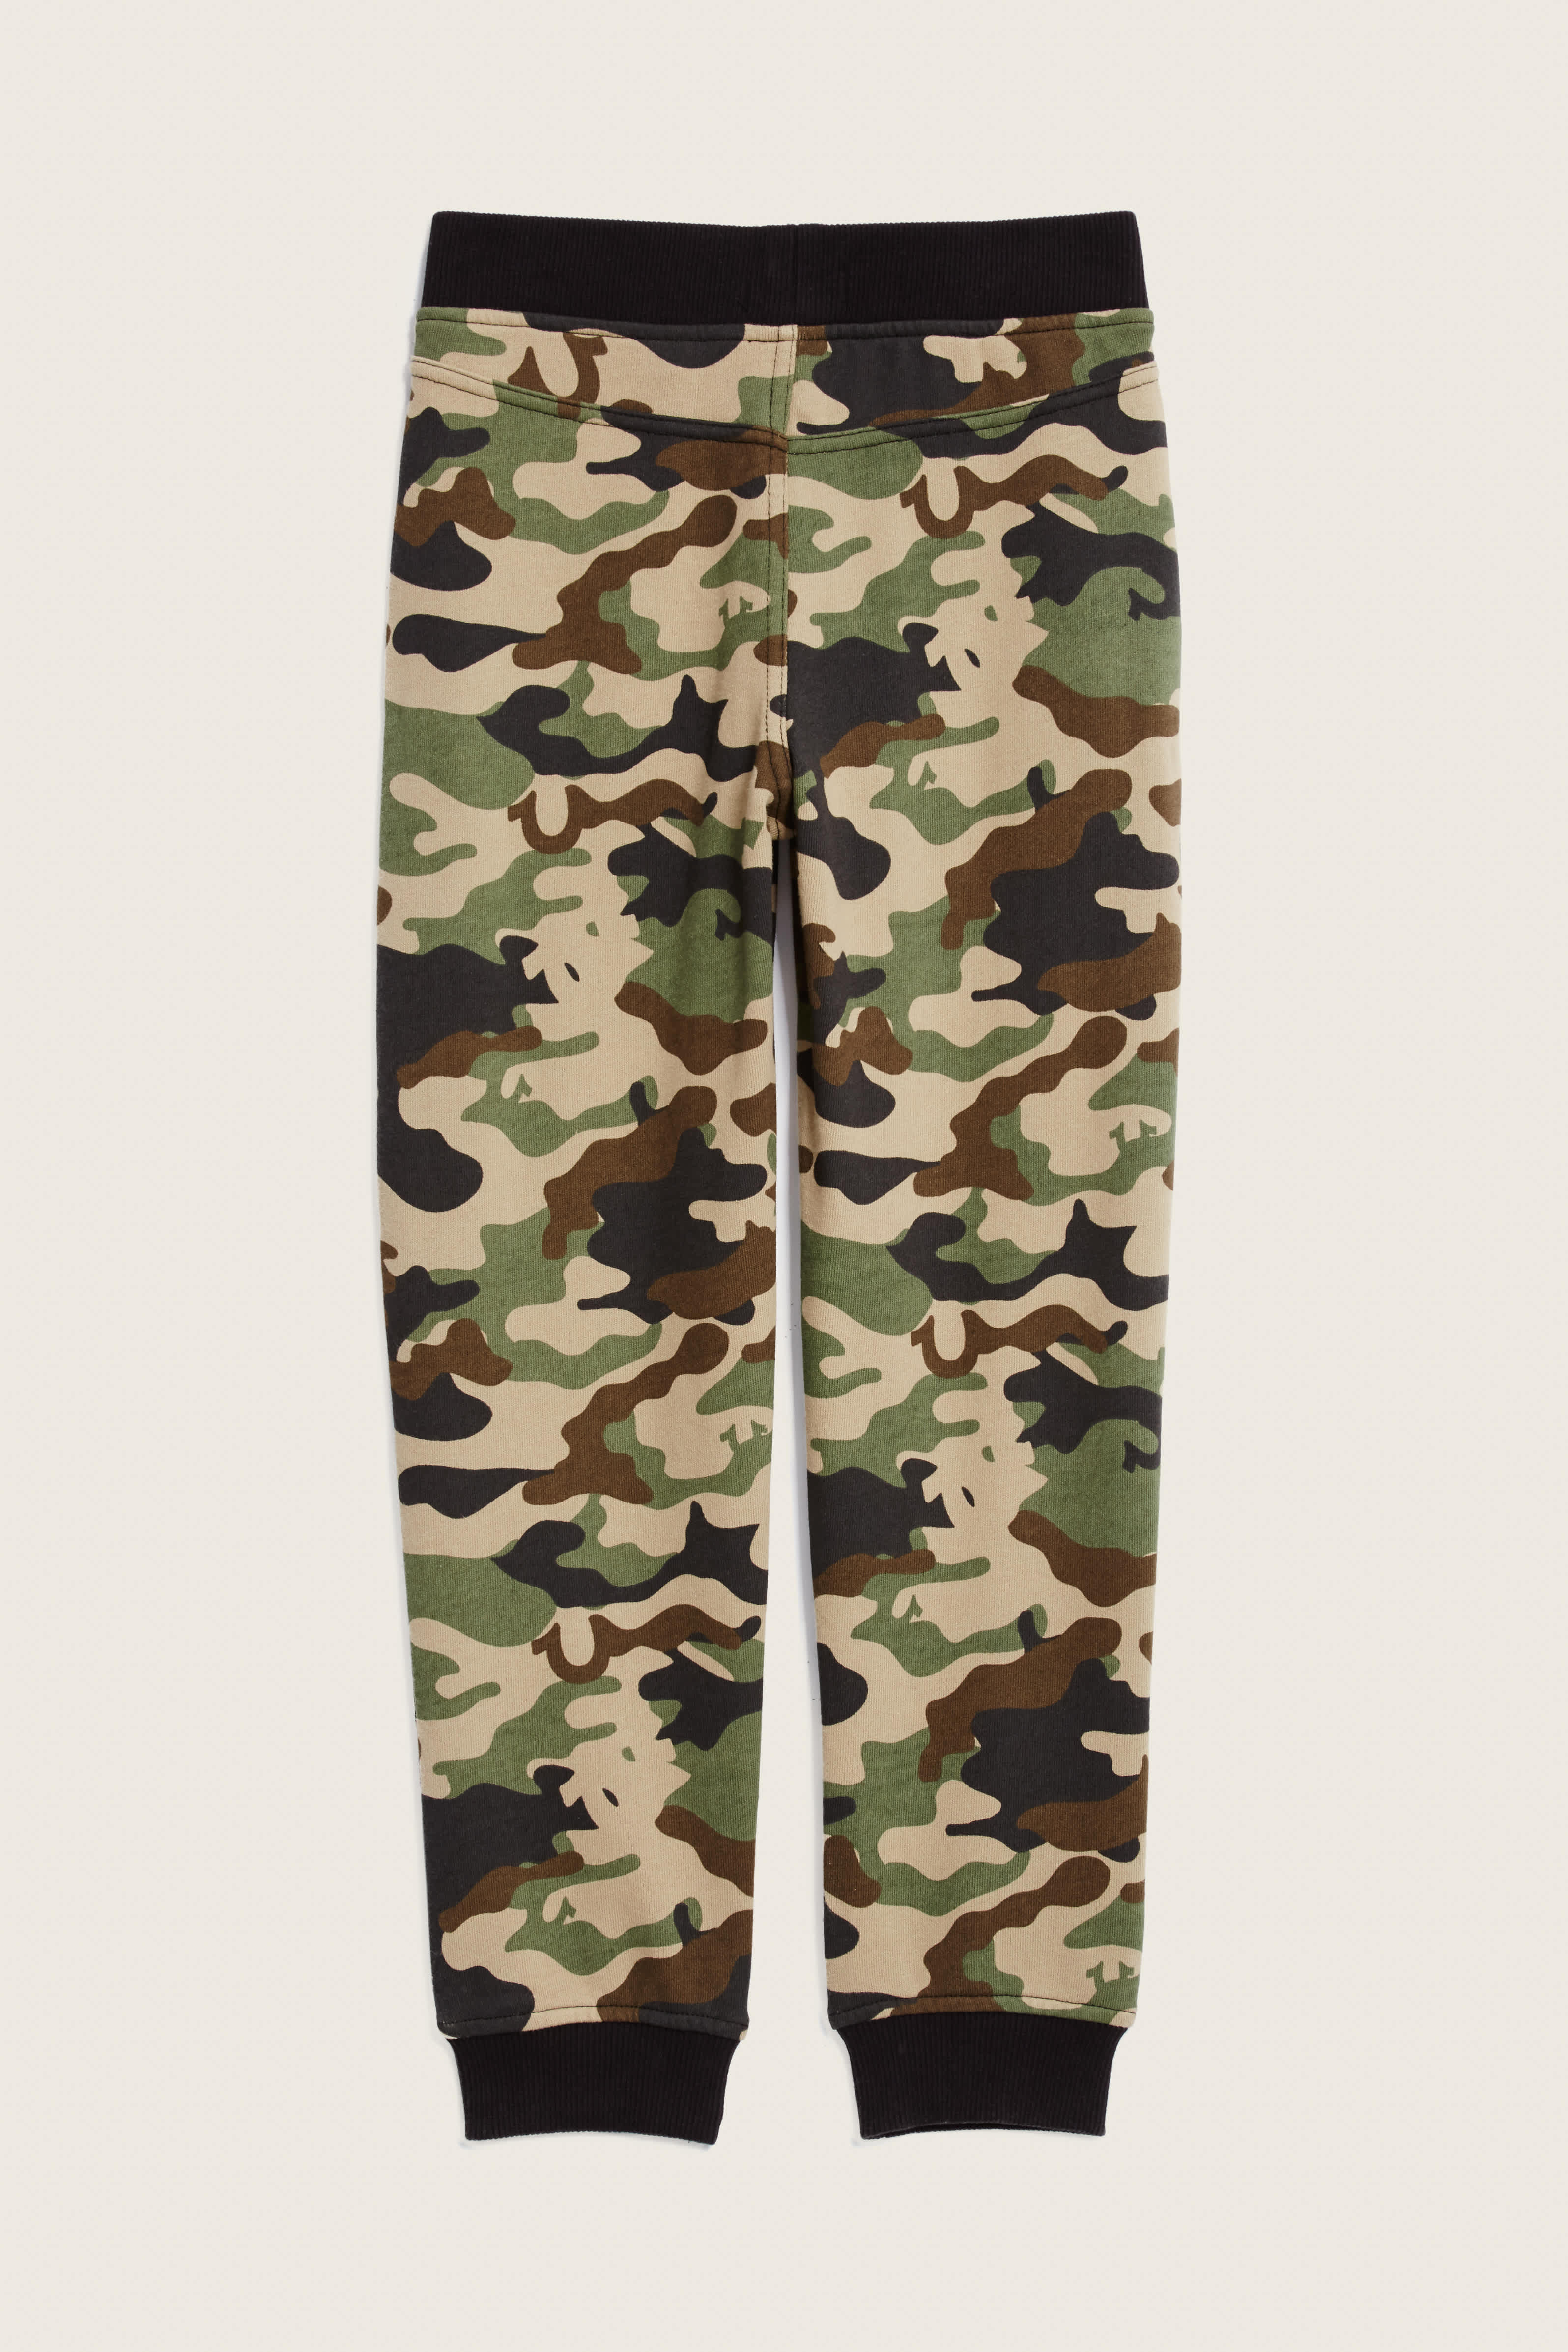 CAMO FRENCH TERRY KIDS PANT